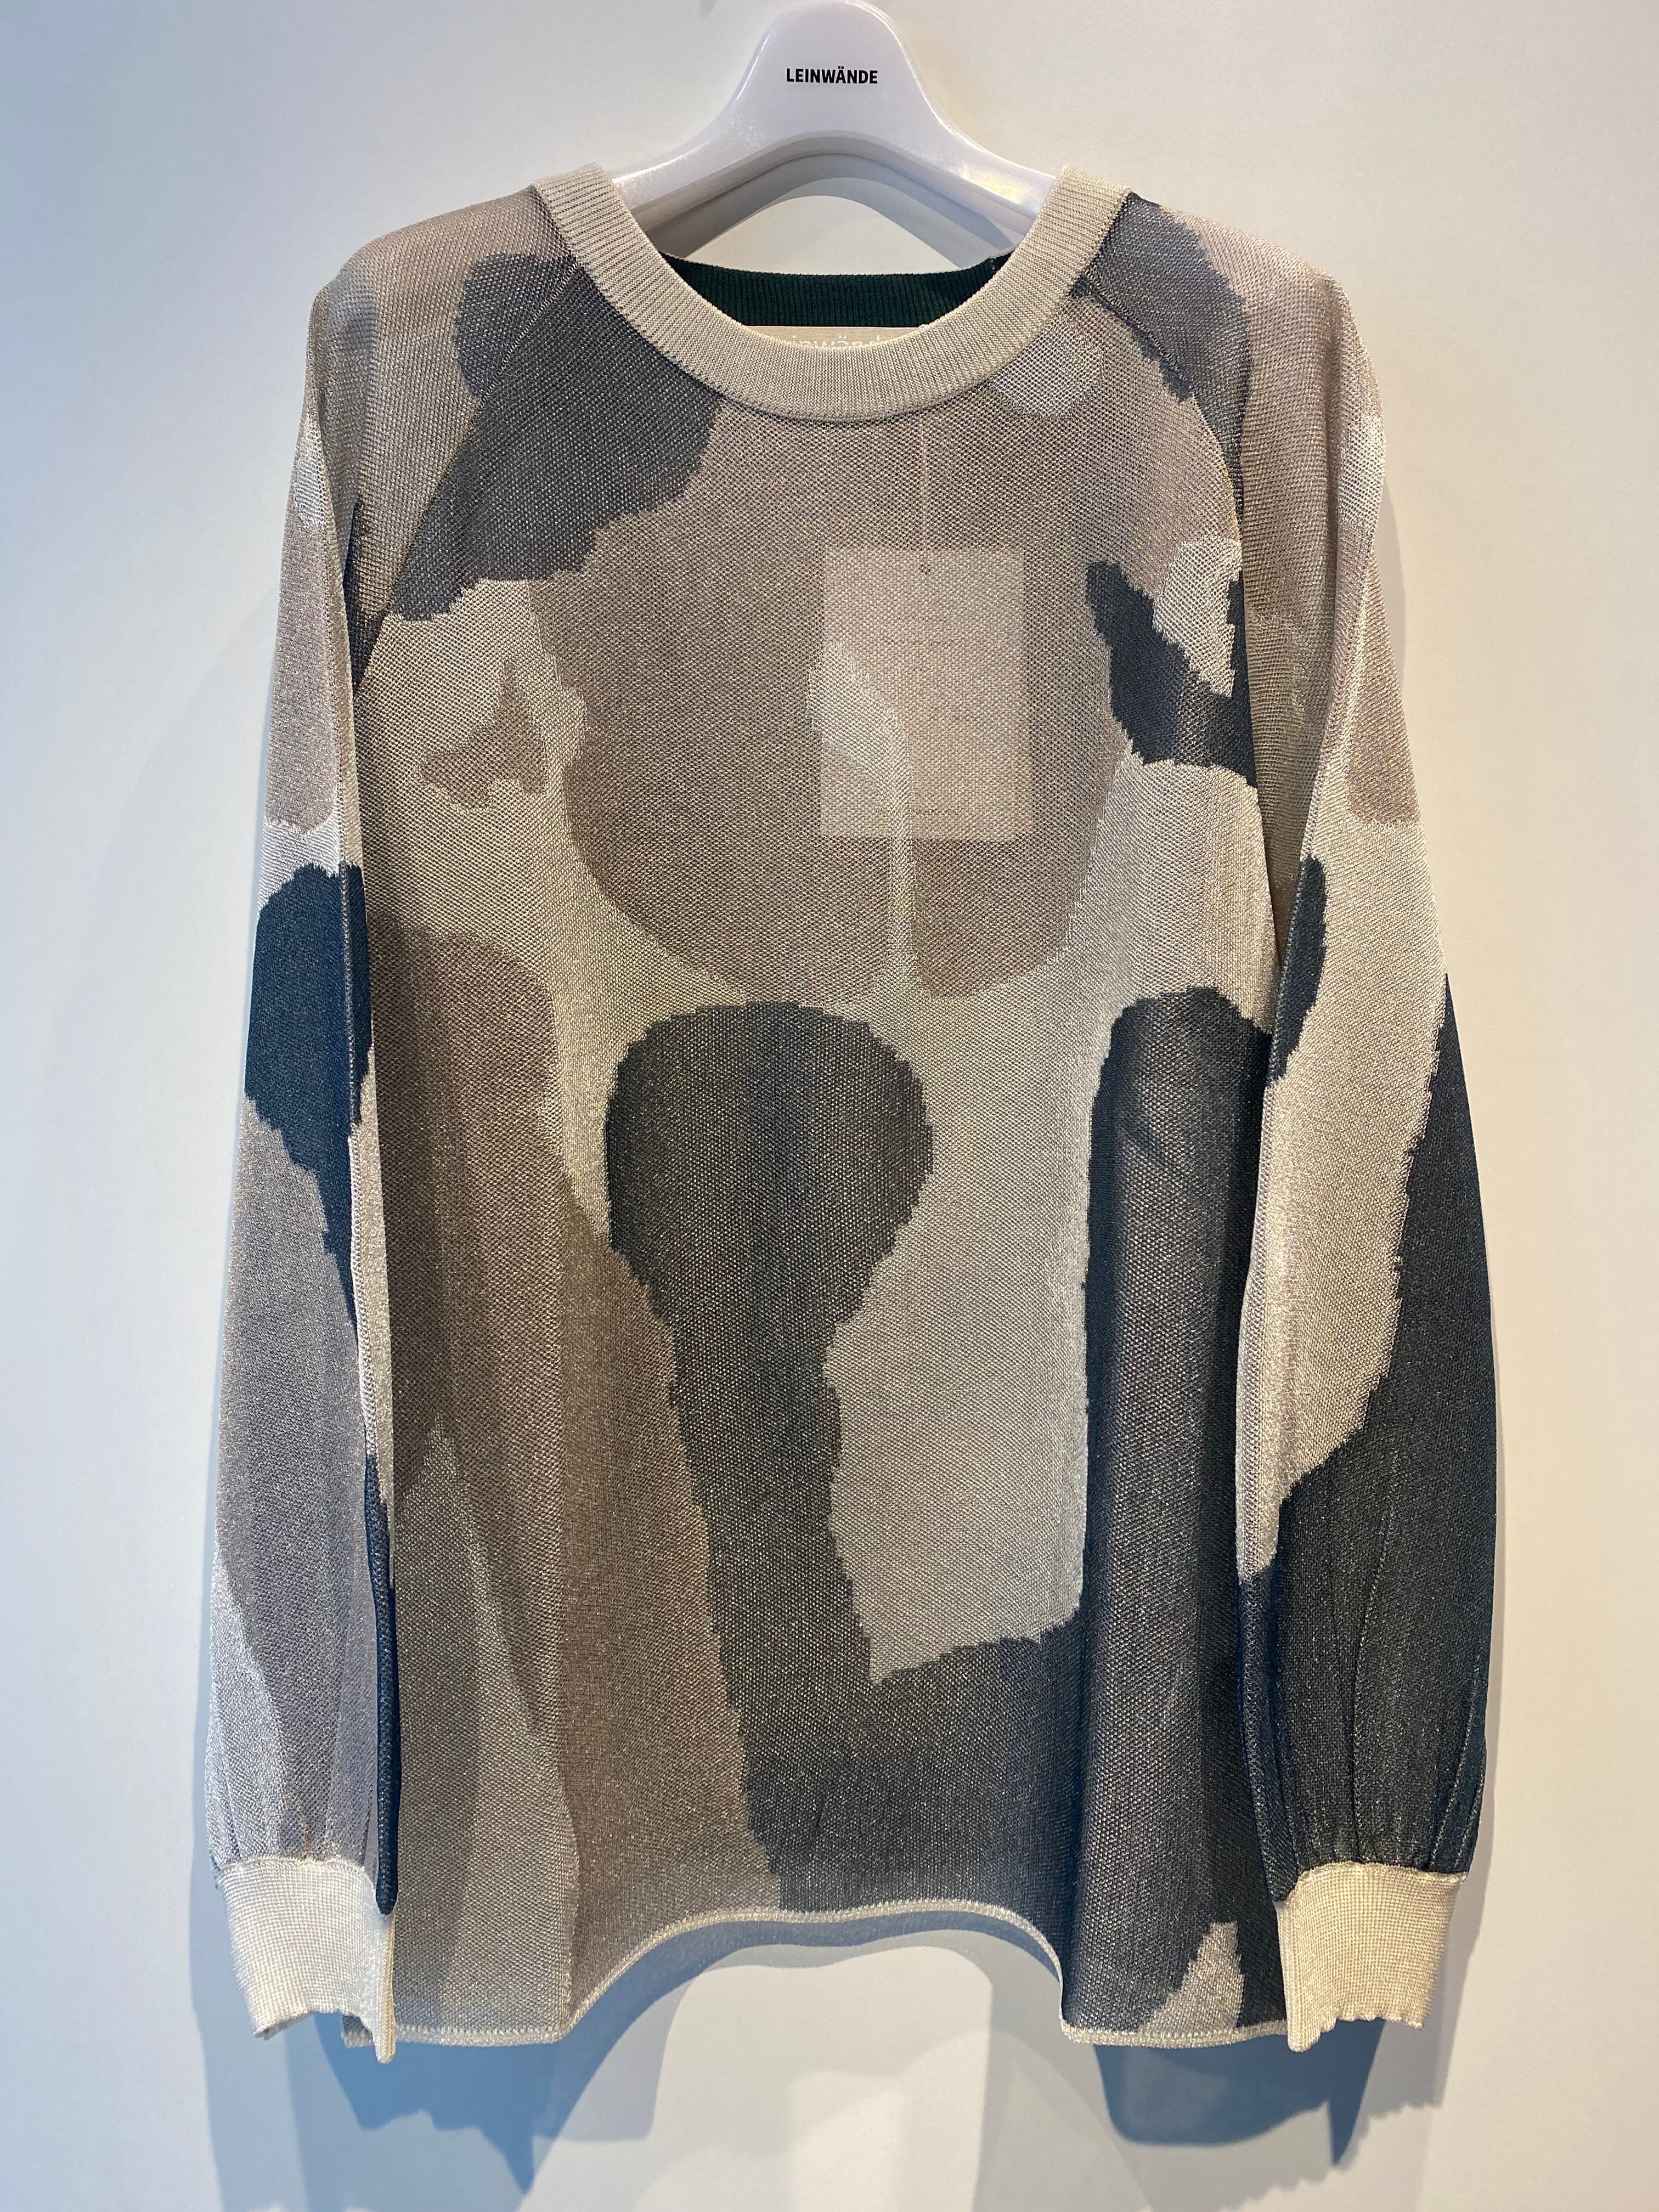 LEINWANDE nature camo sheer top／通販のお問い合わせ | AAR powered by BASE